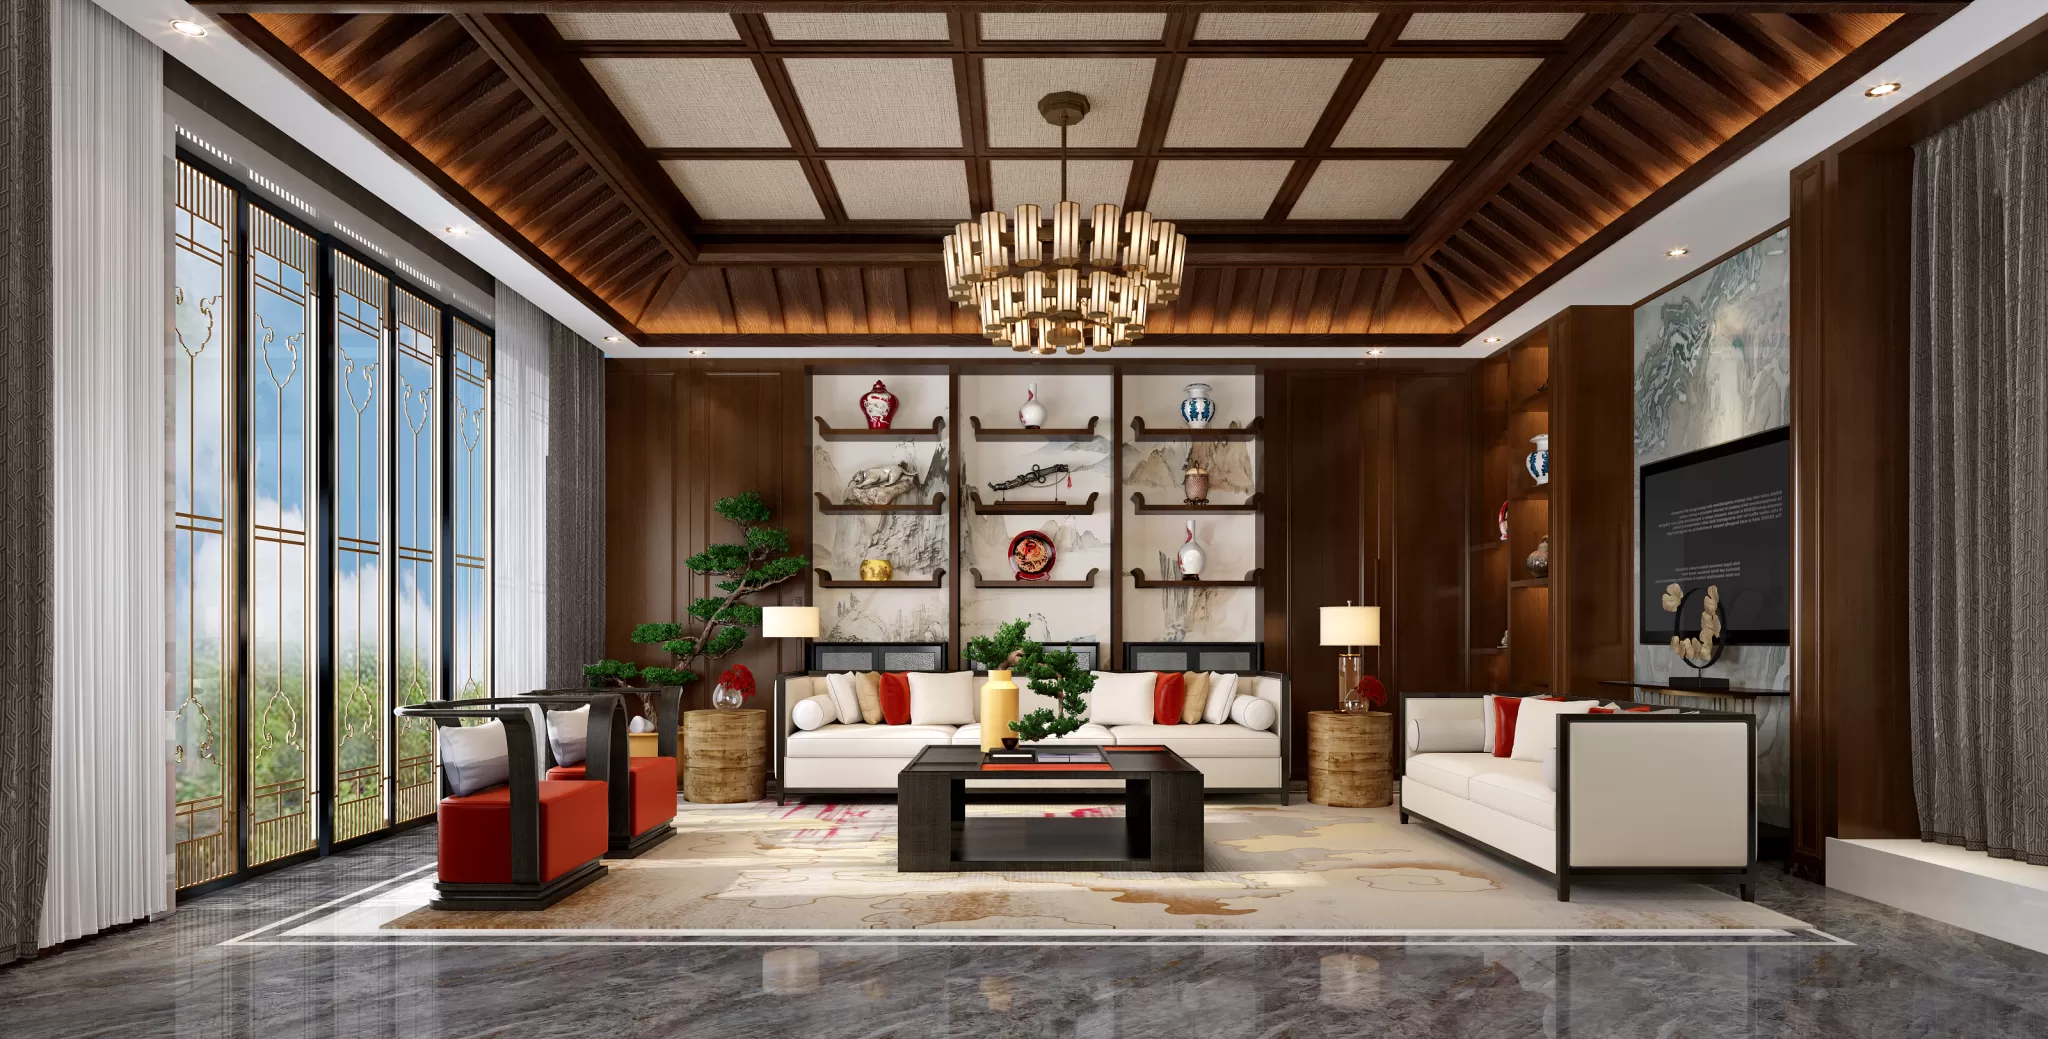 DESMOD INTERIOR 2021 (VRAY) – 4. LIVING ROOM – CHINESE – 033